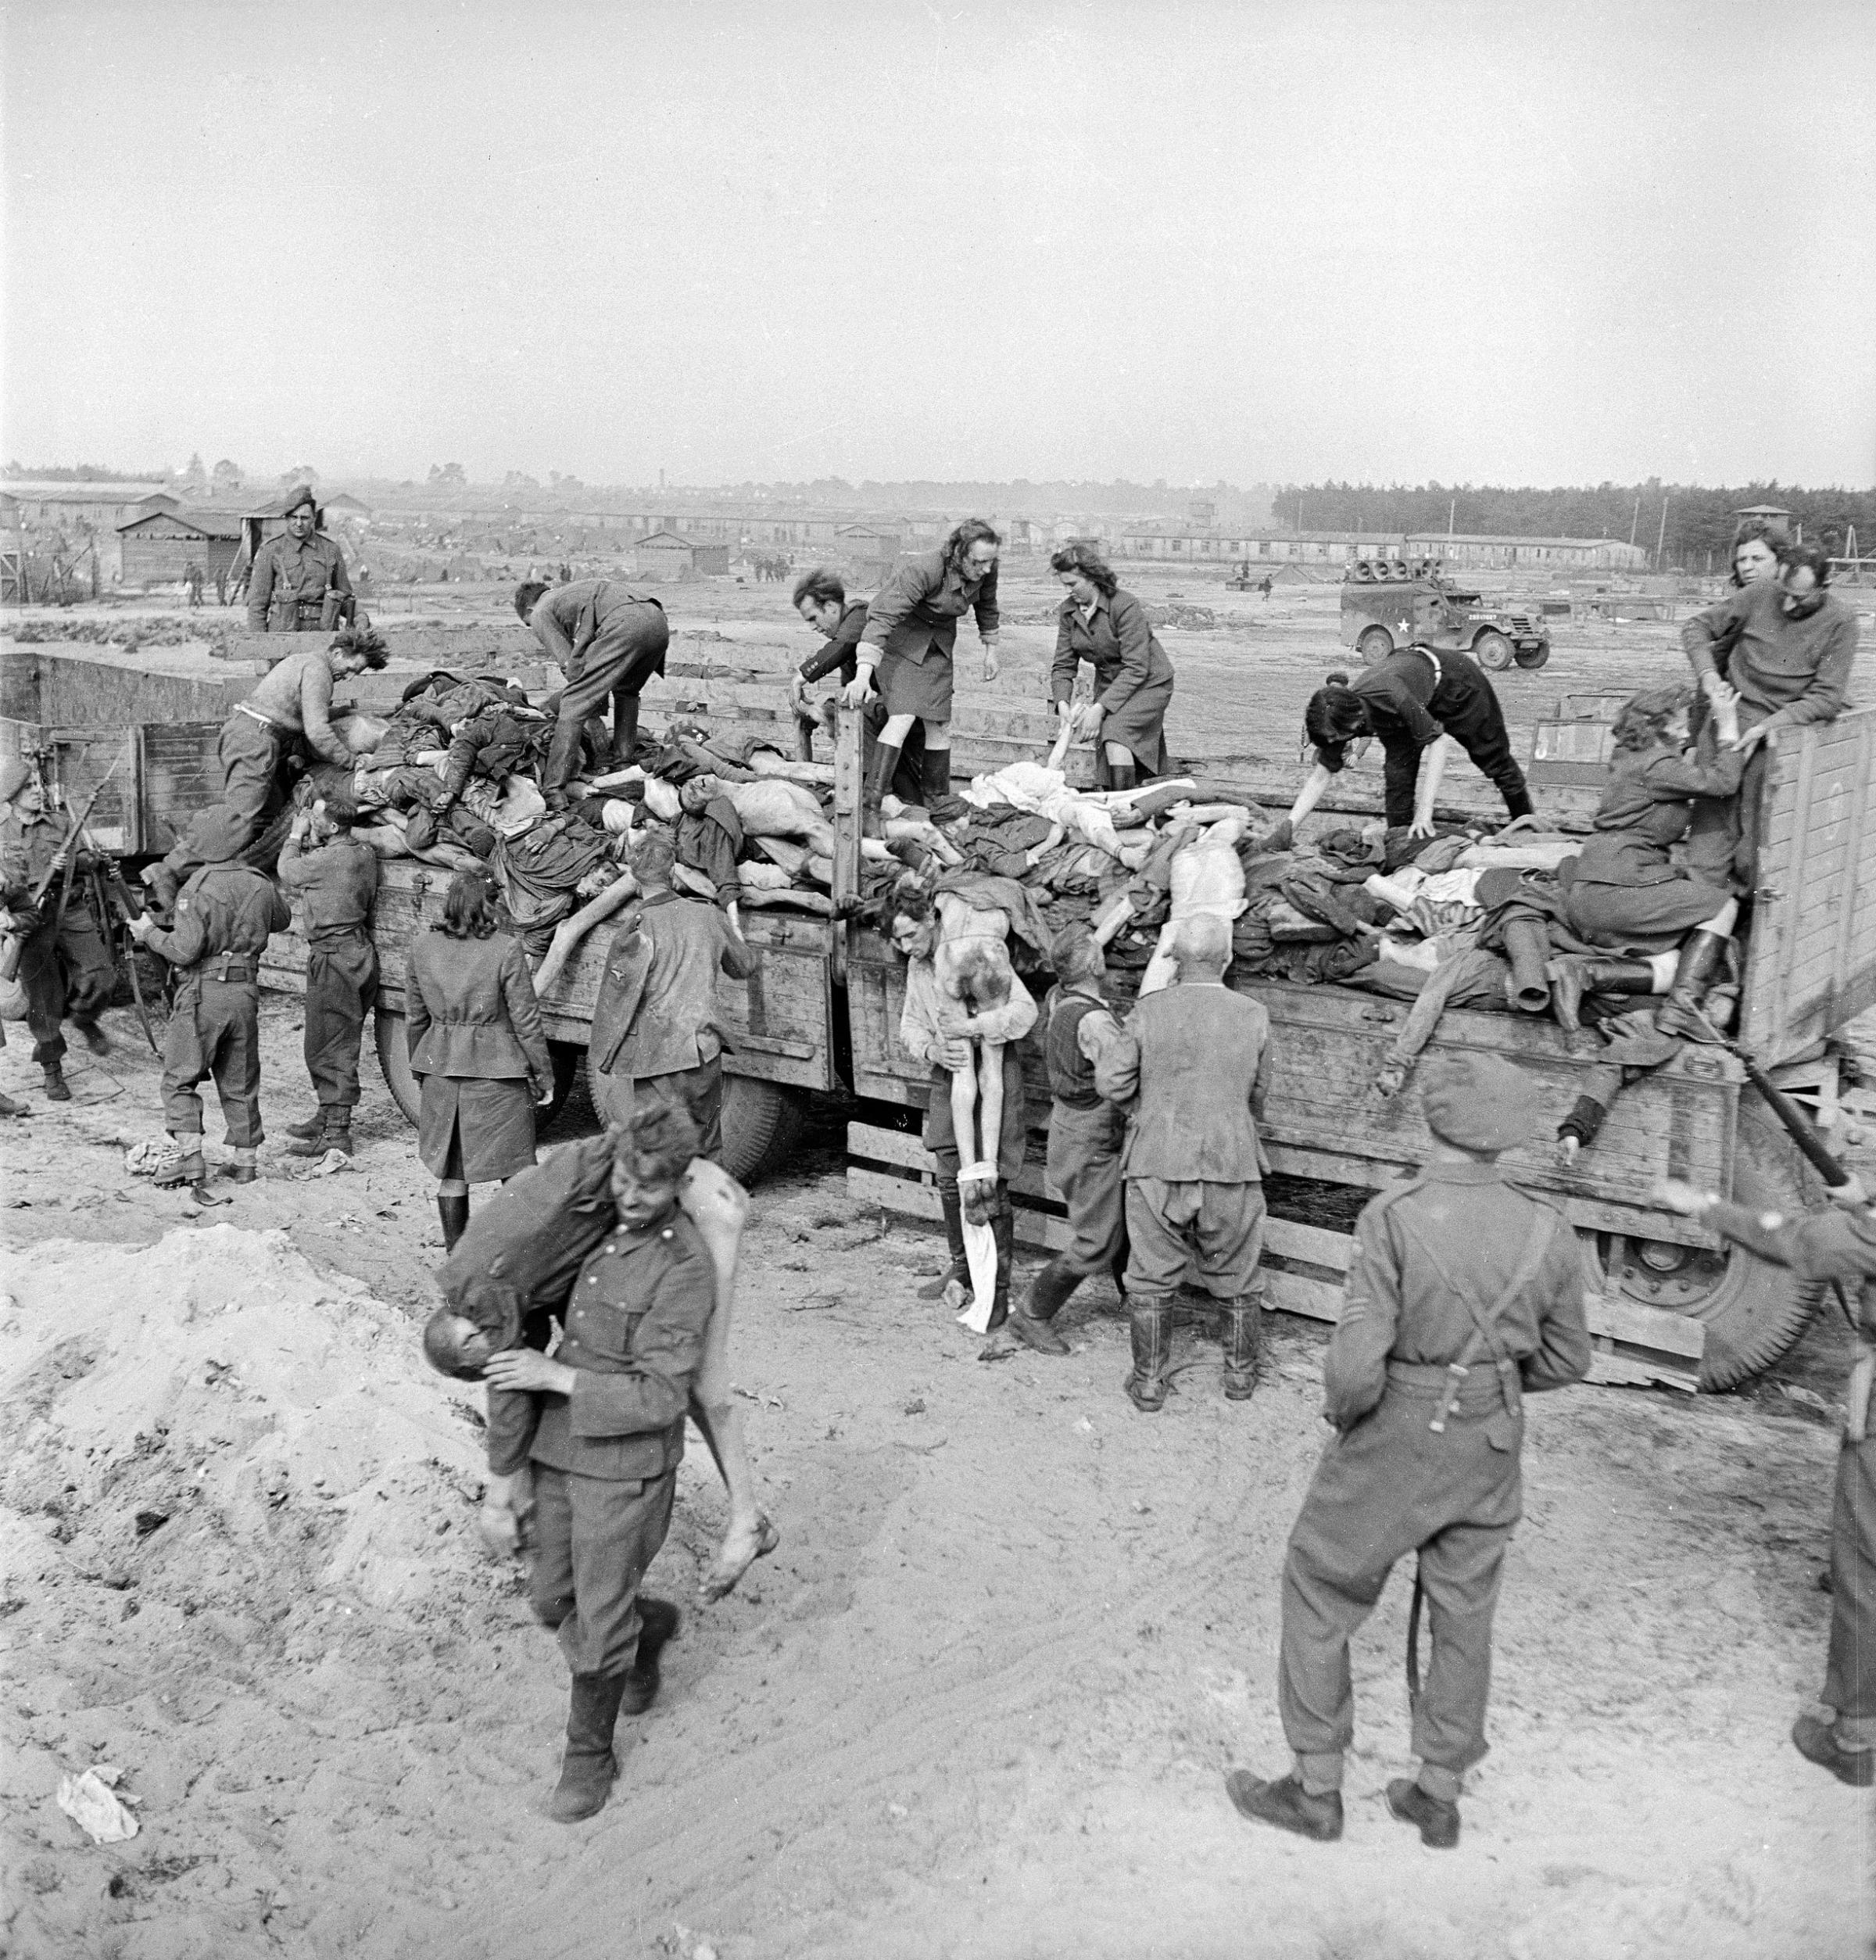 Male and female German SS soldiers forced to load corpses onto trucks under British guard at the Bergen-Belsen concentration camp, 1945.